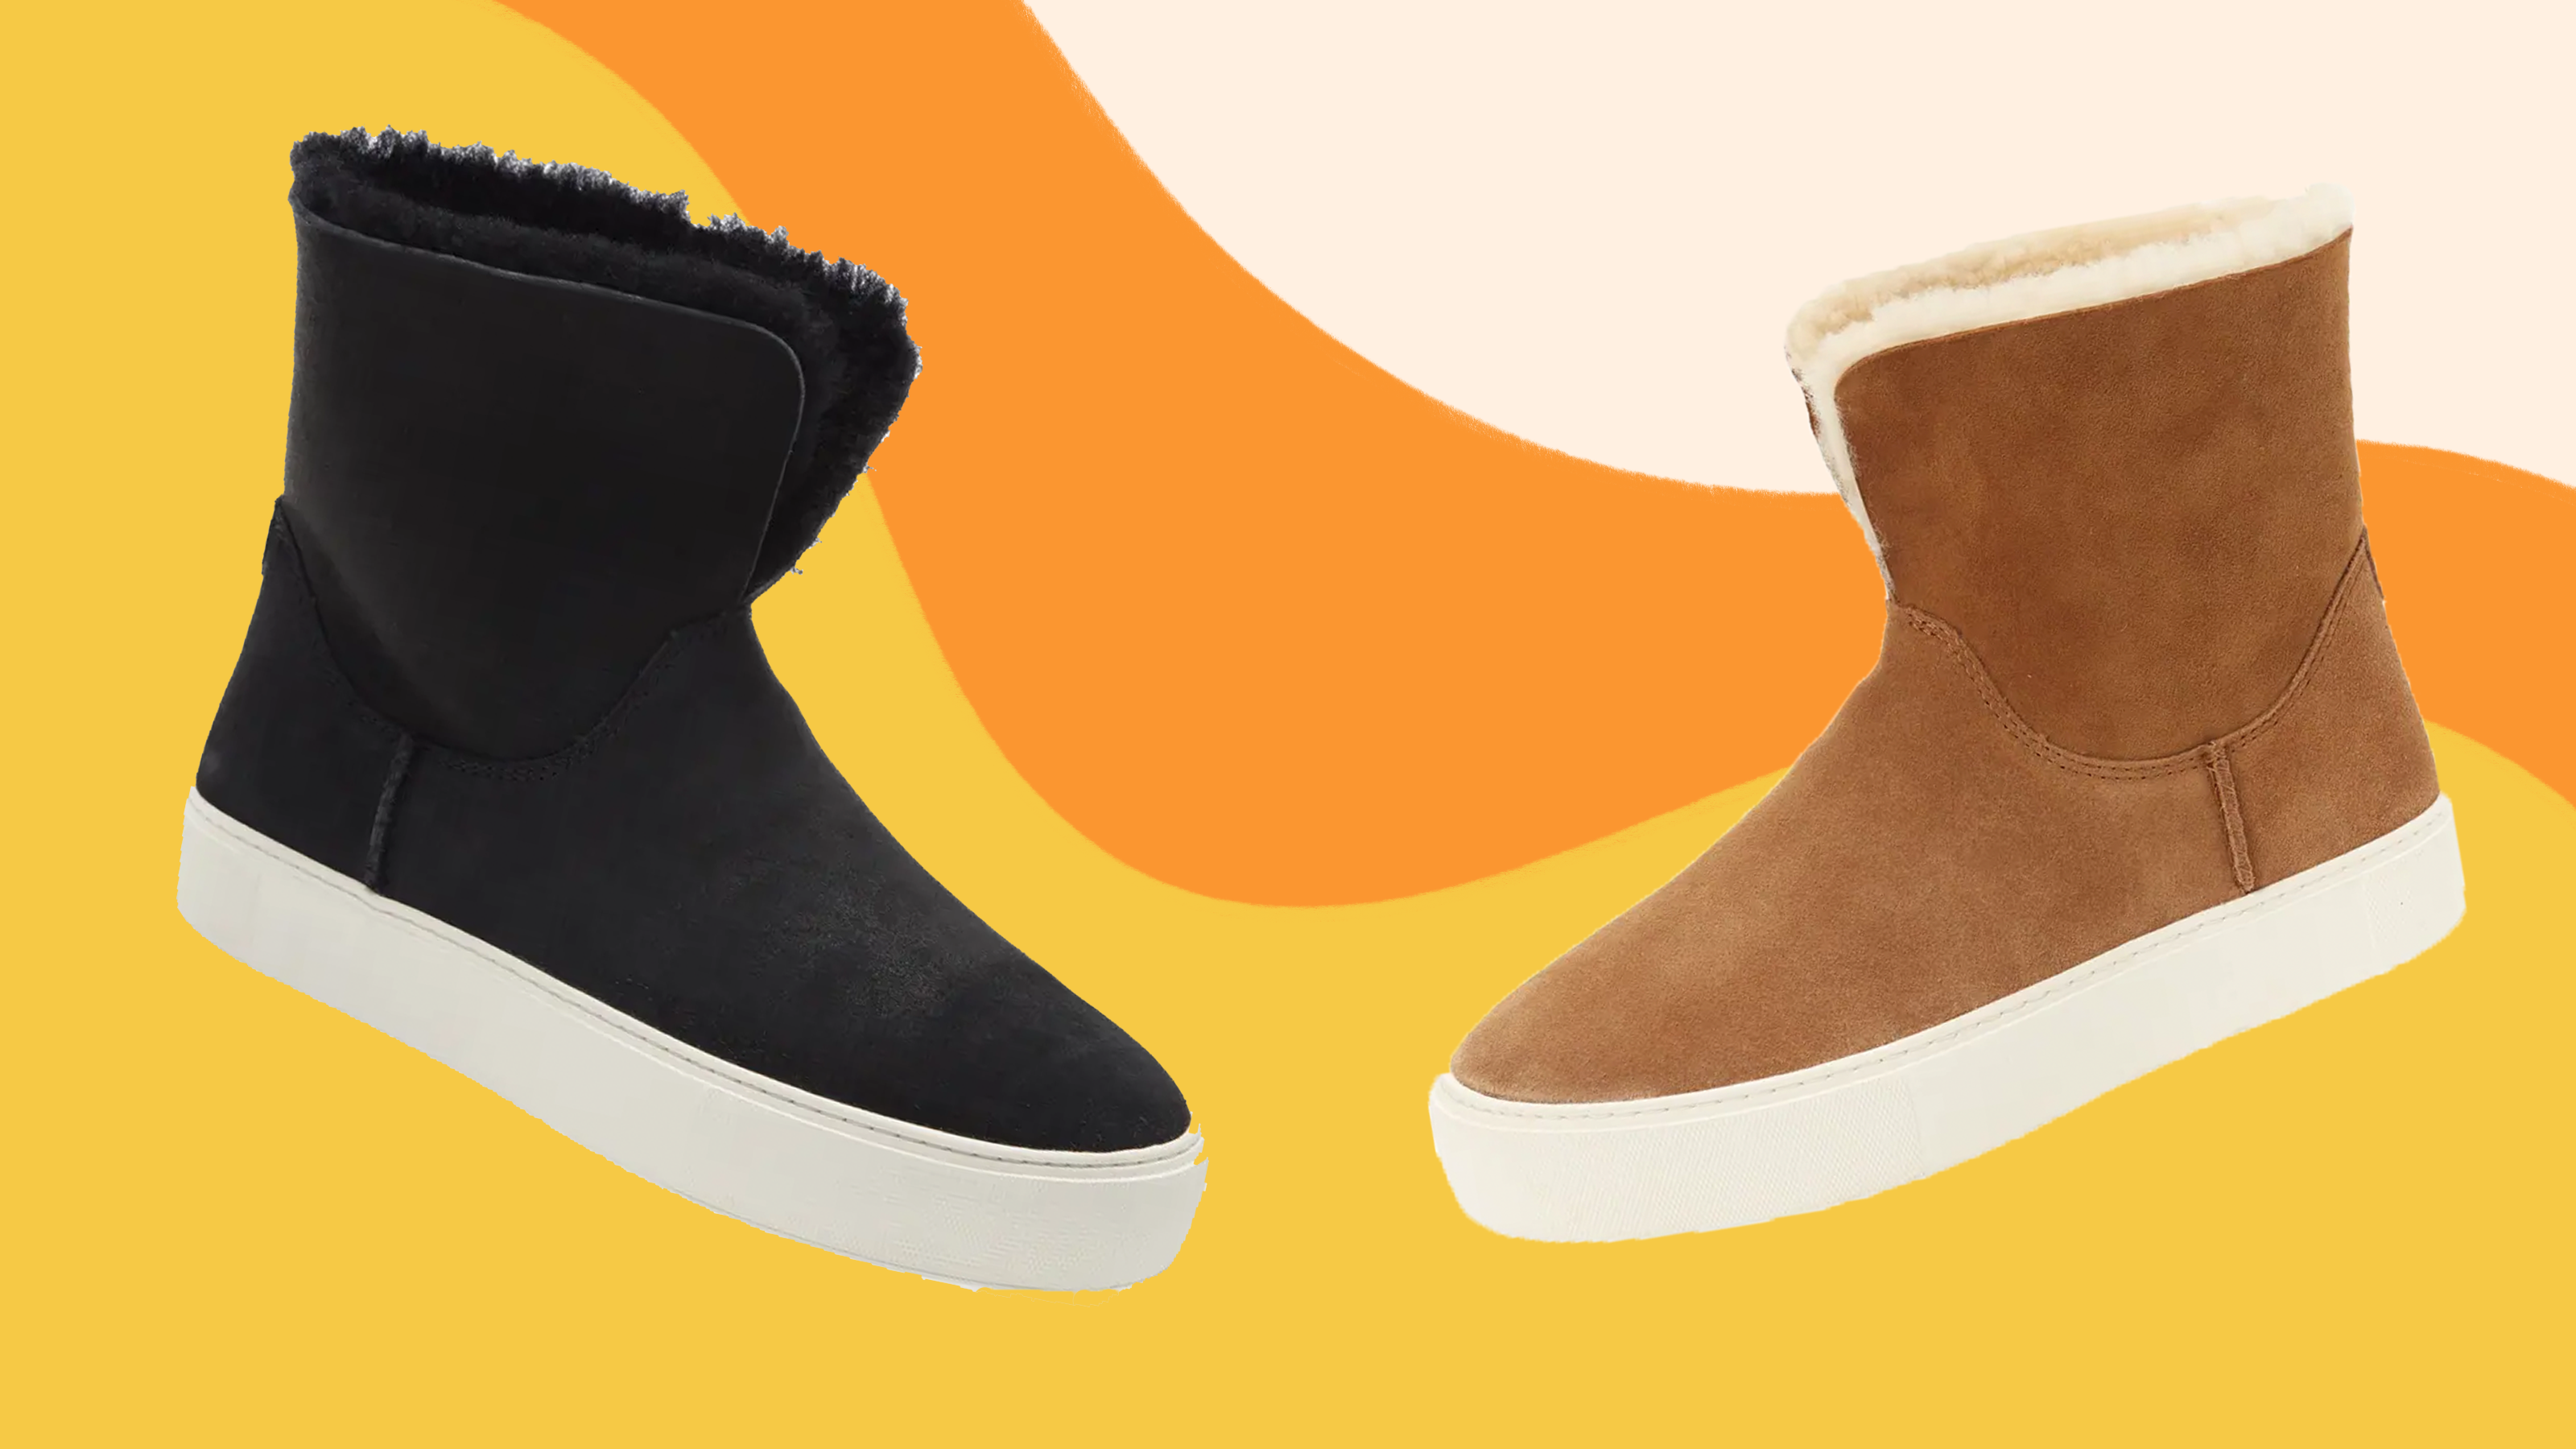 ugg boots on sale at nordstrom